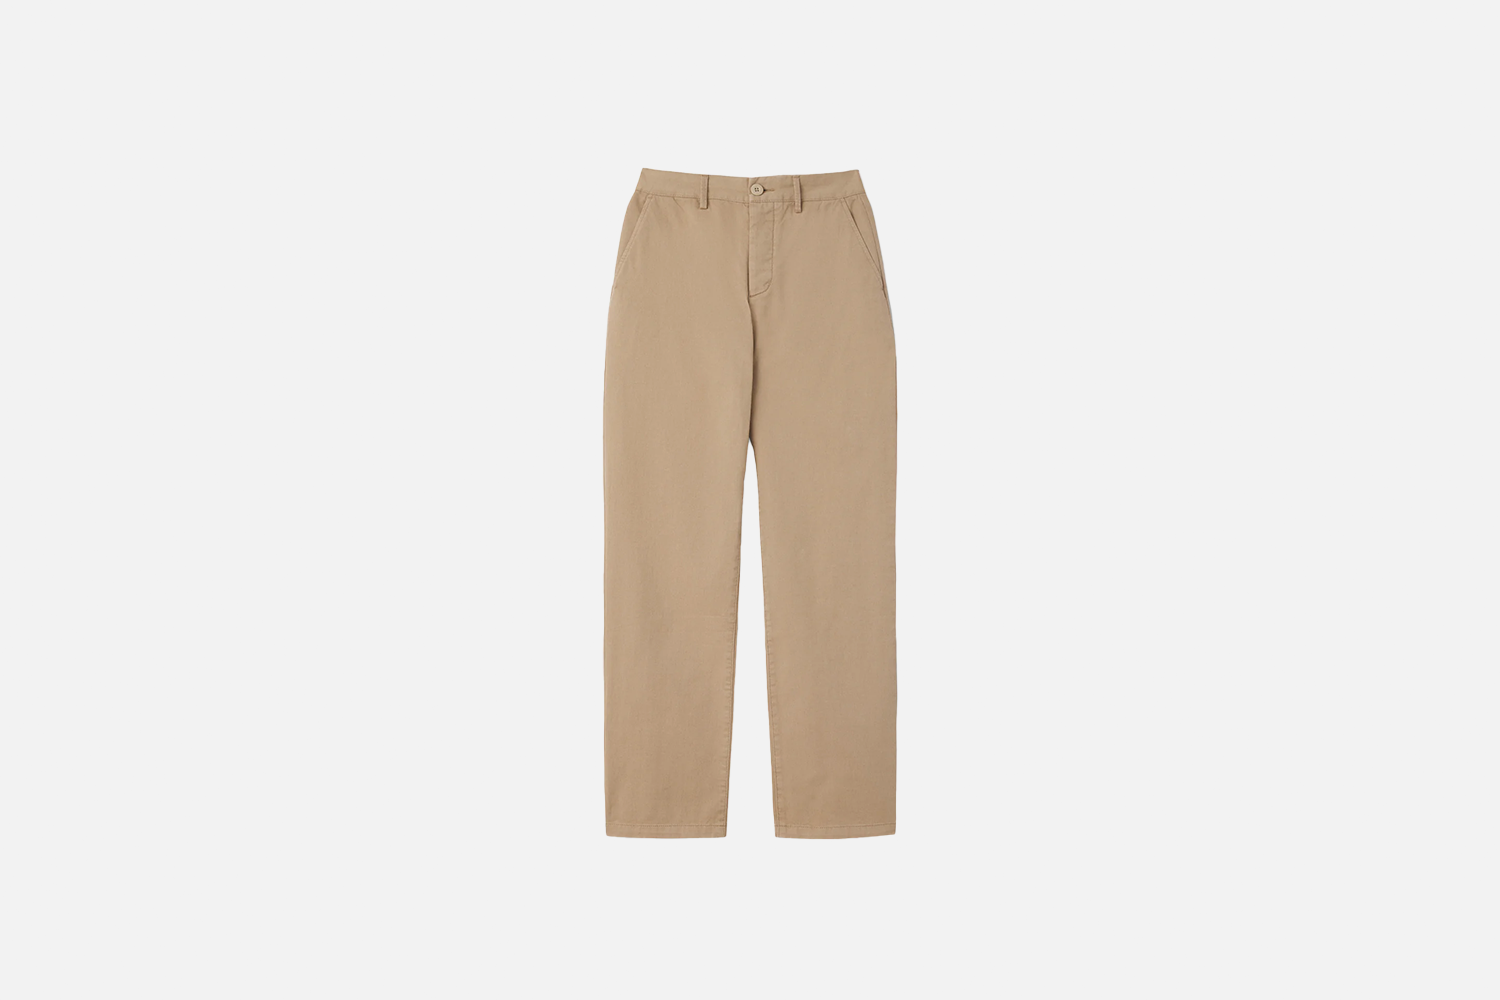 Frank And Oak The Joey Straight Chino Pant